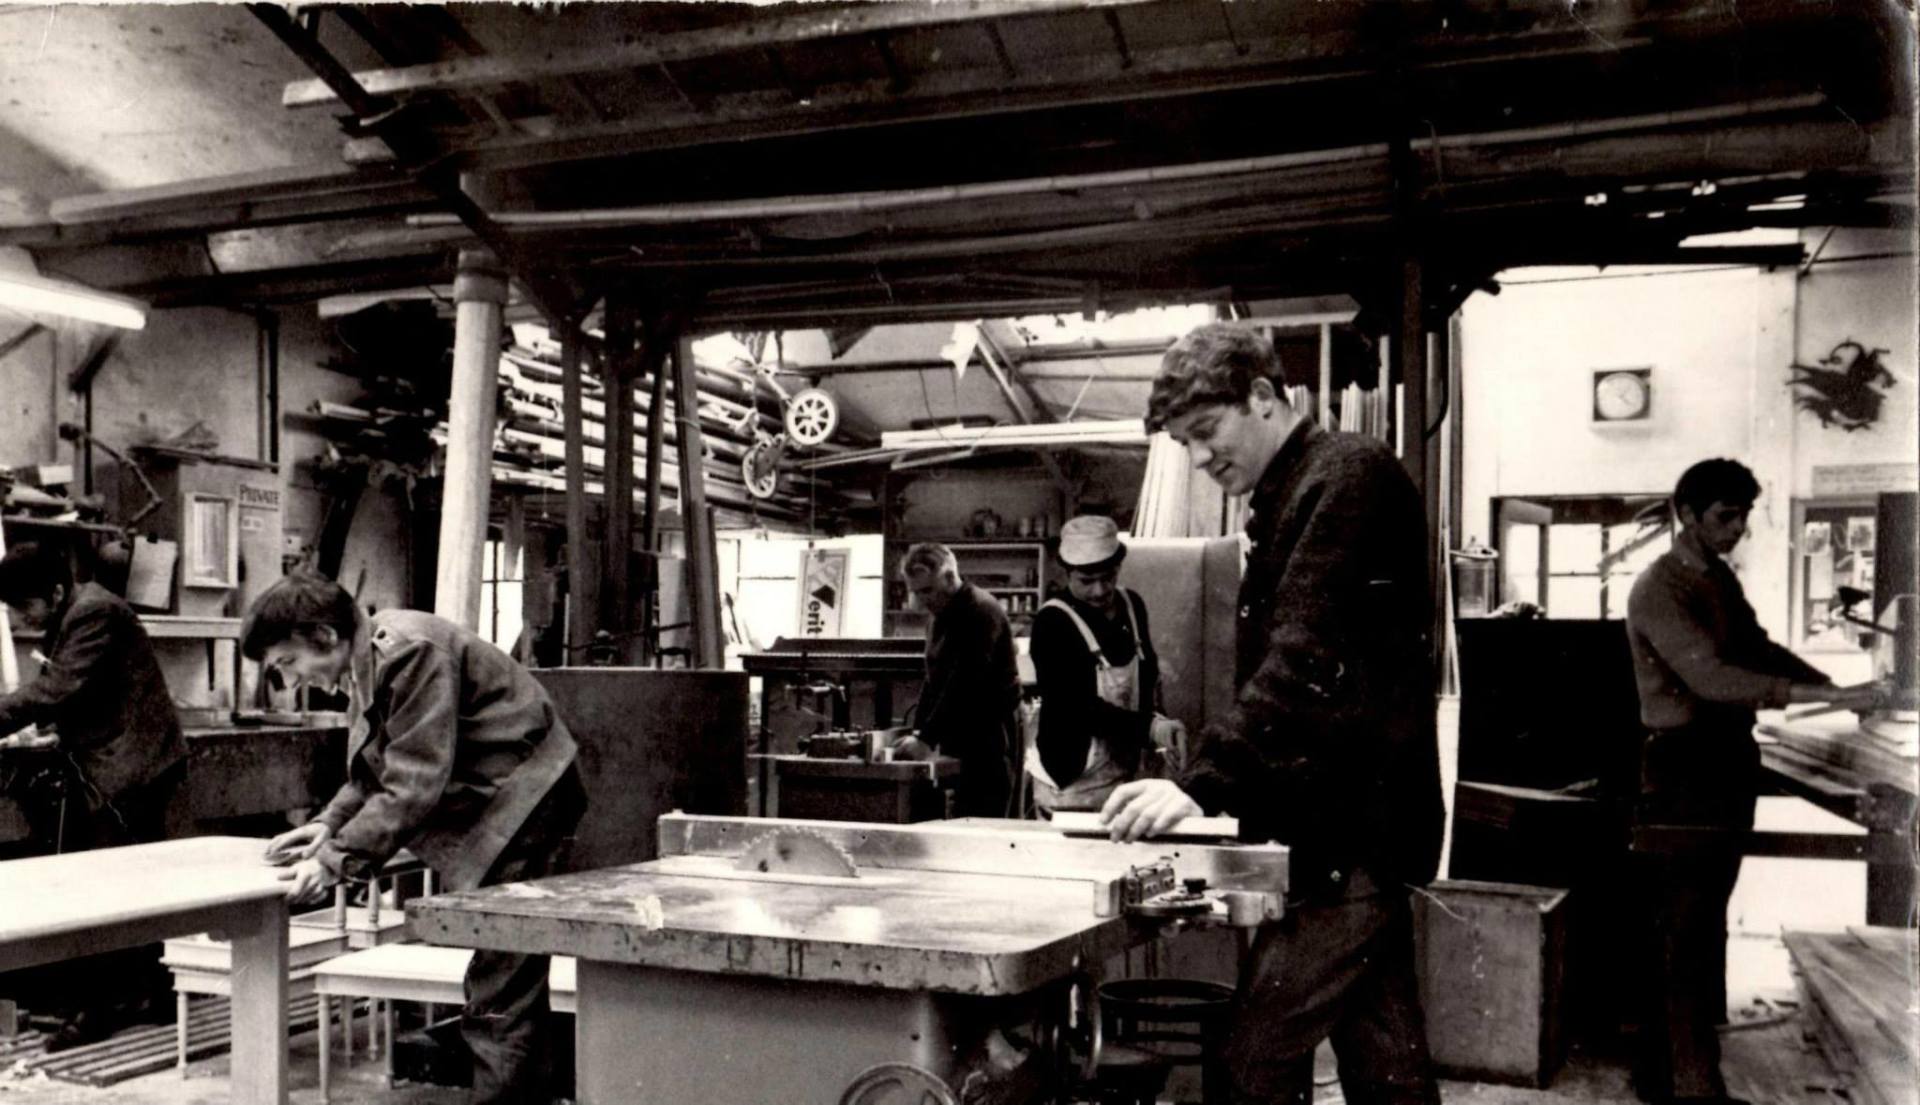 Workers working in a well populated workshop